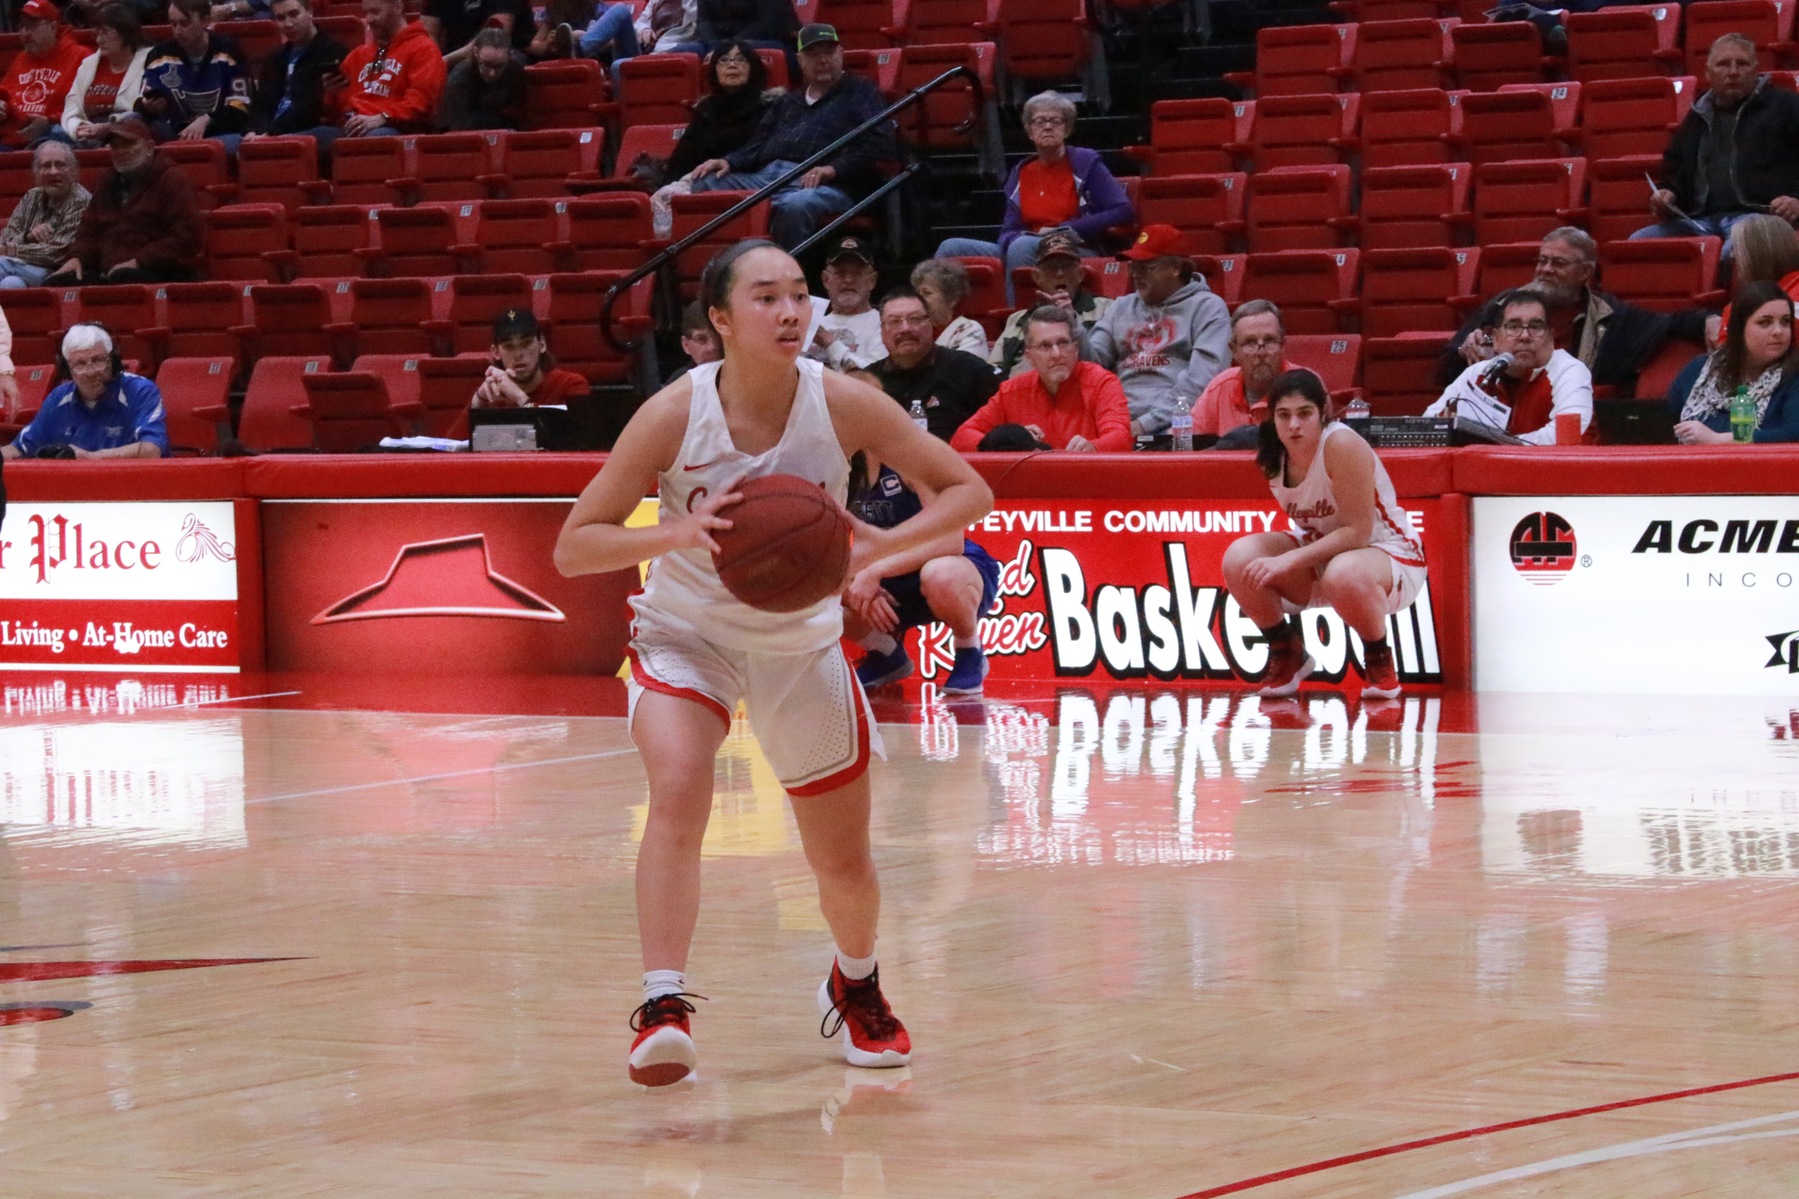 Sizzling Second Half Shooting Powers the Red Raven Women's Basketball Team Over Colby, 74-44